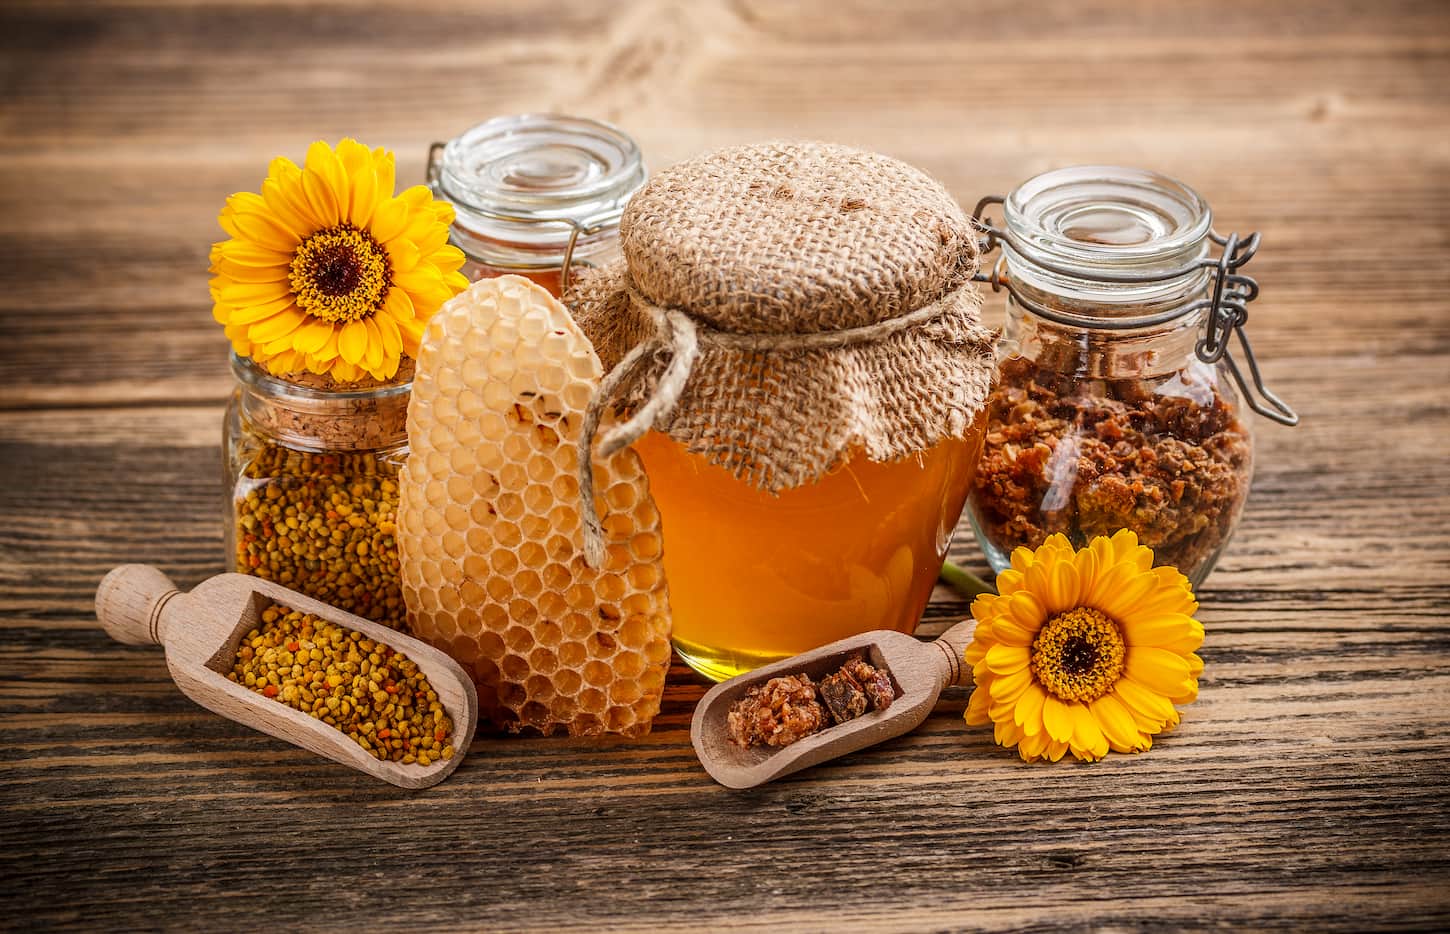 An image of some products that can be made out of honey beautifully arranged with sunflower embellishes on a wooden table.